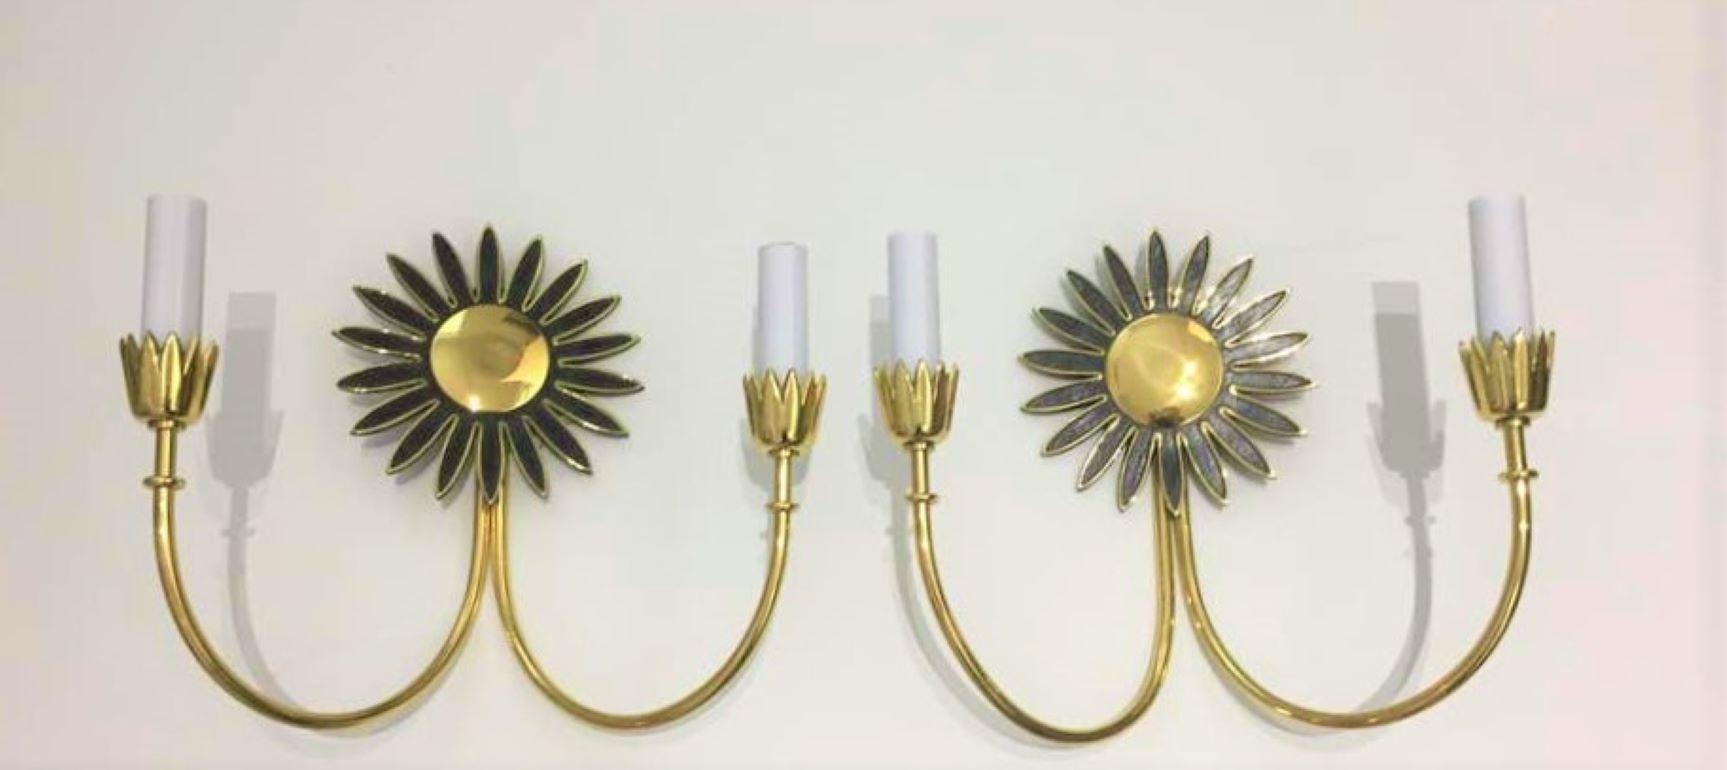 This stylish, chic and dare we say rare set of Mid-Century Modern wall scones were acquired in Italy and they have been professionally polished and rewired.

Note: The brass has also been lacquered and thus no tarnishing.